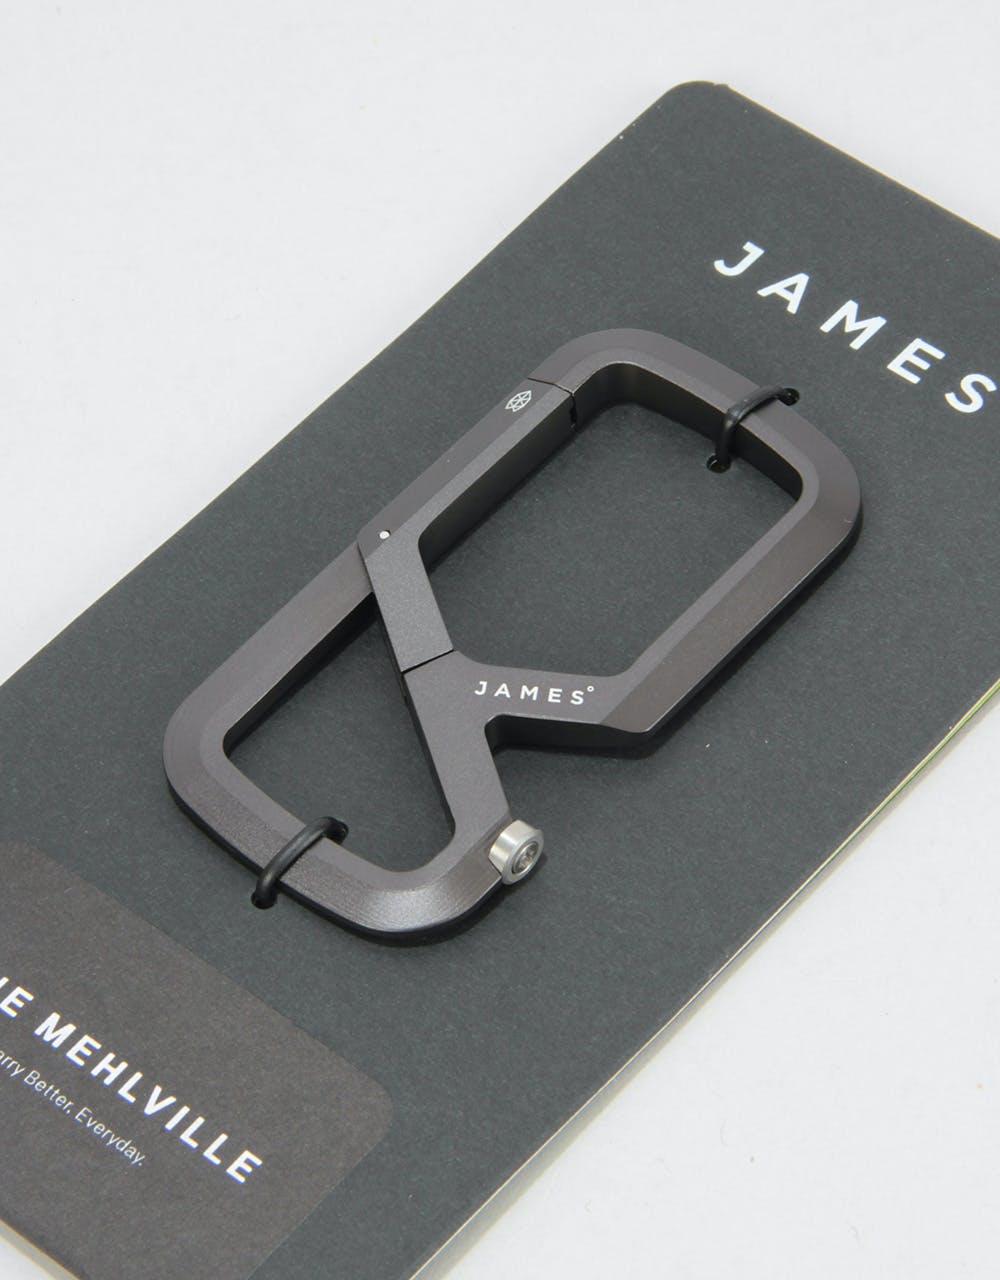 James The Mehlville 'Carabiner' Keychain - Space Grey/Stainless